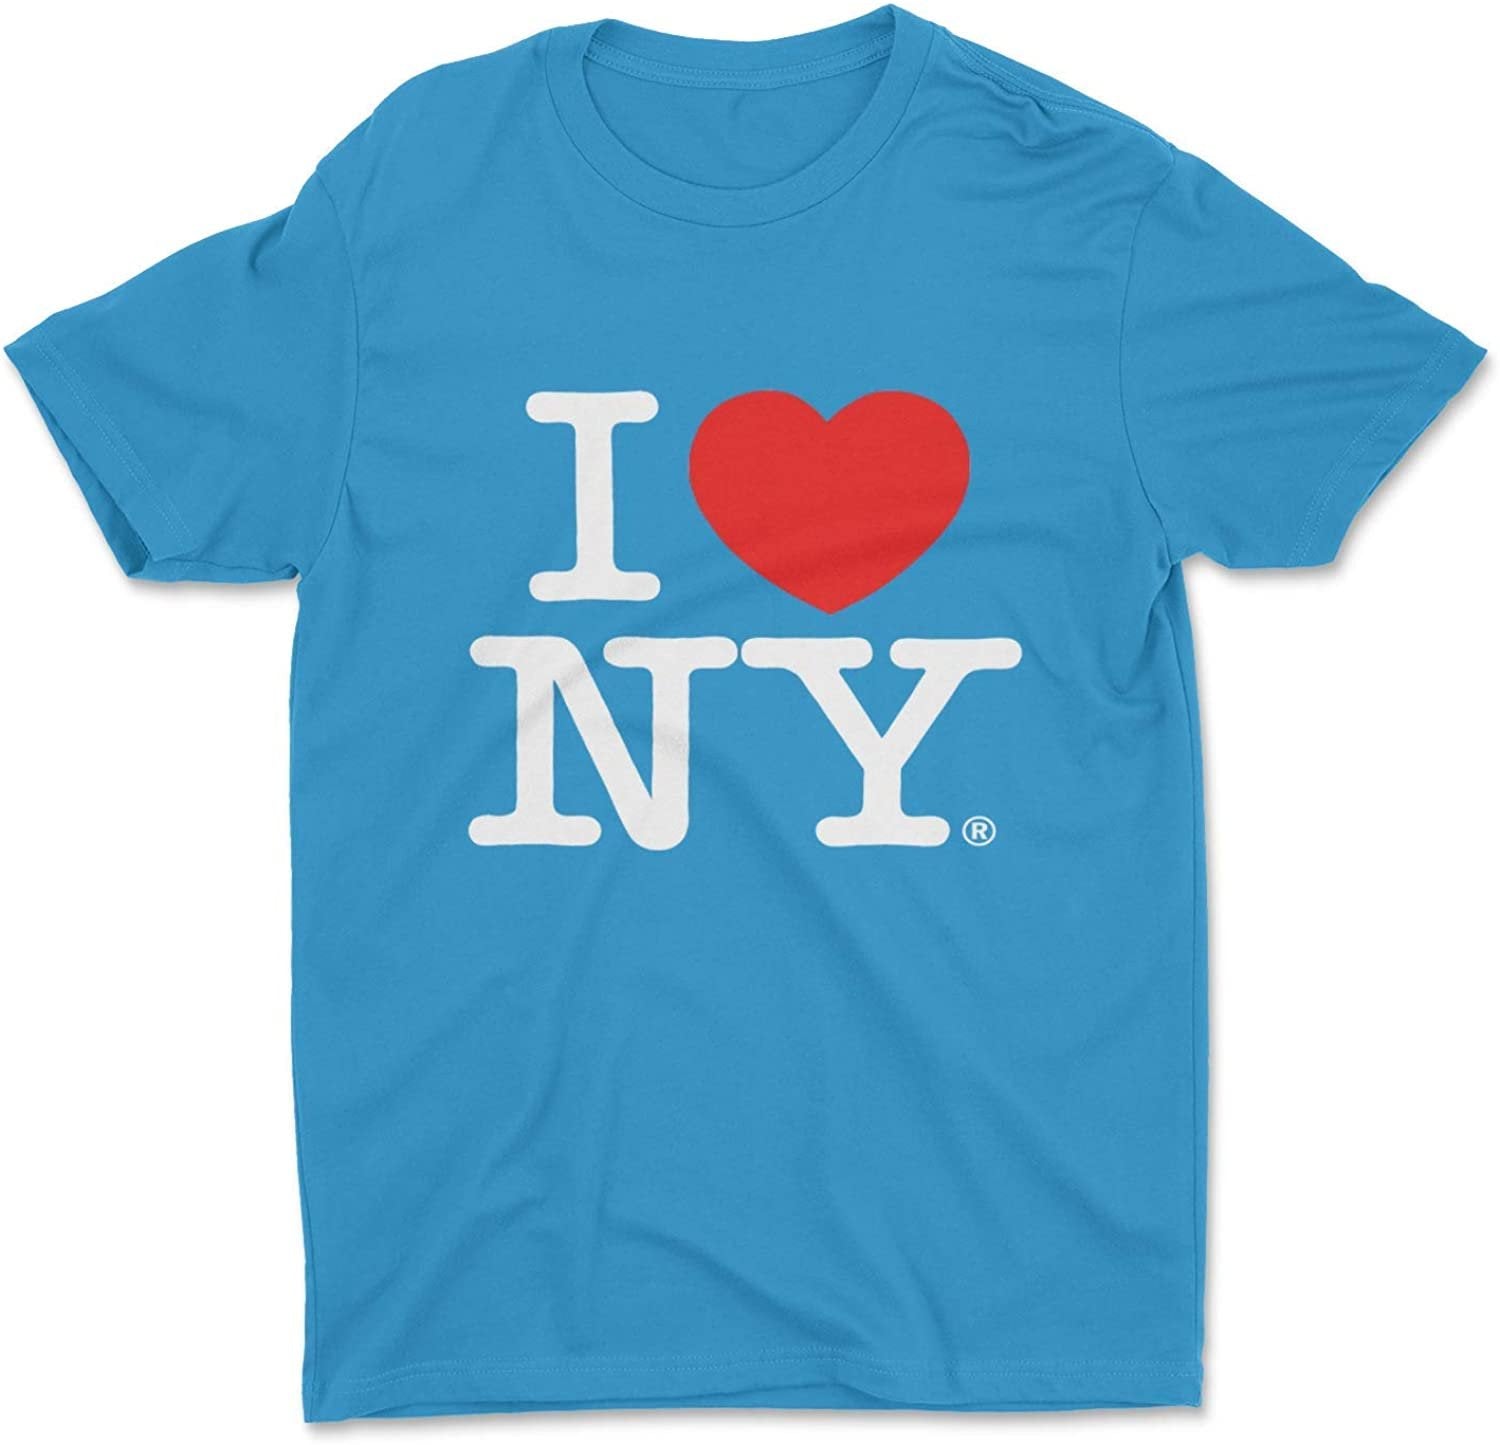 I Love NY Kids T-Shirt Officially Licensed Unisex Tees (Youth, Turquoise)